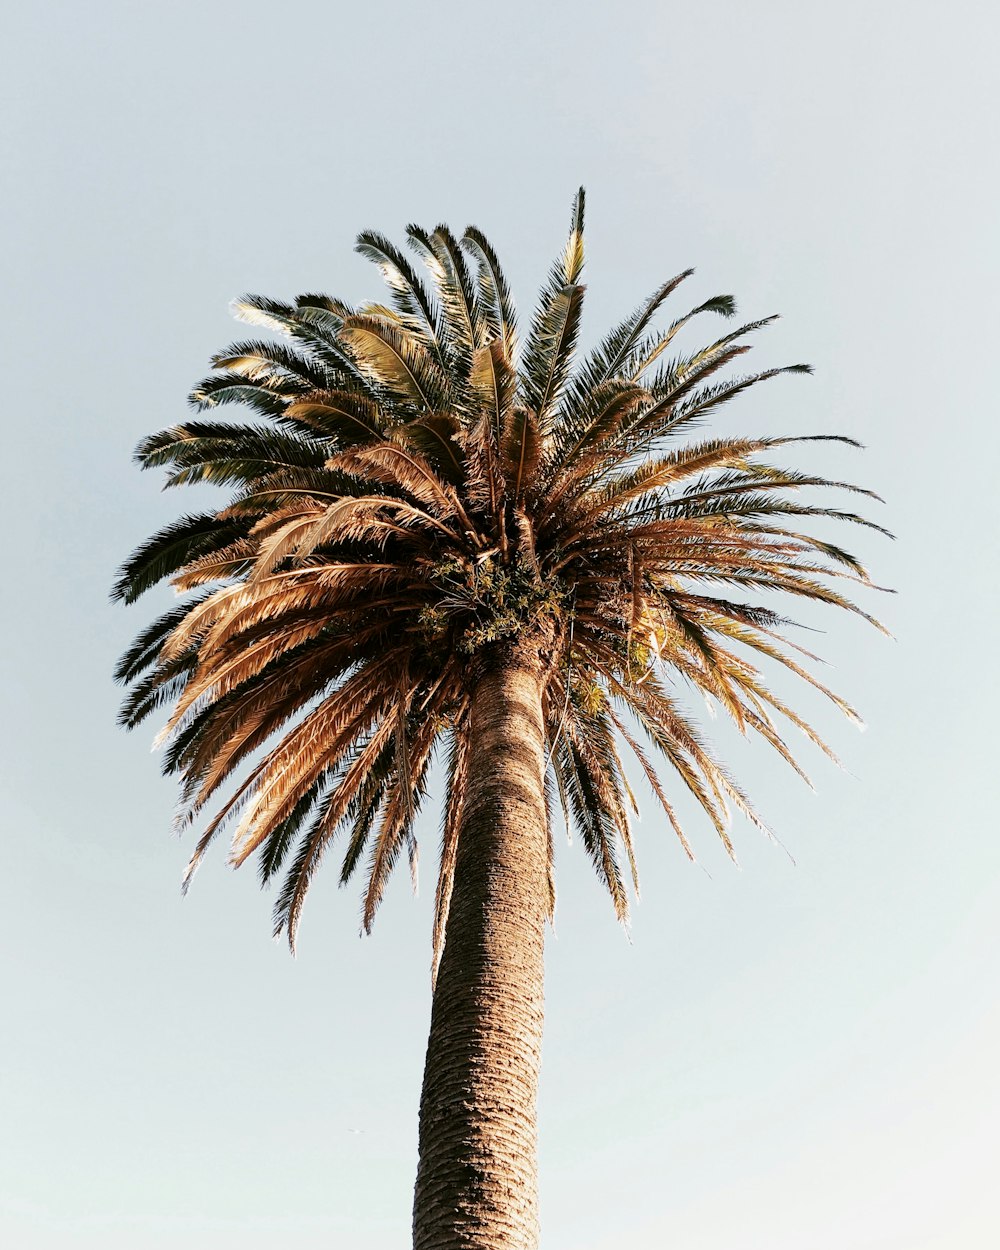 brown palm tree under white sky during daytime